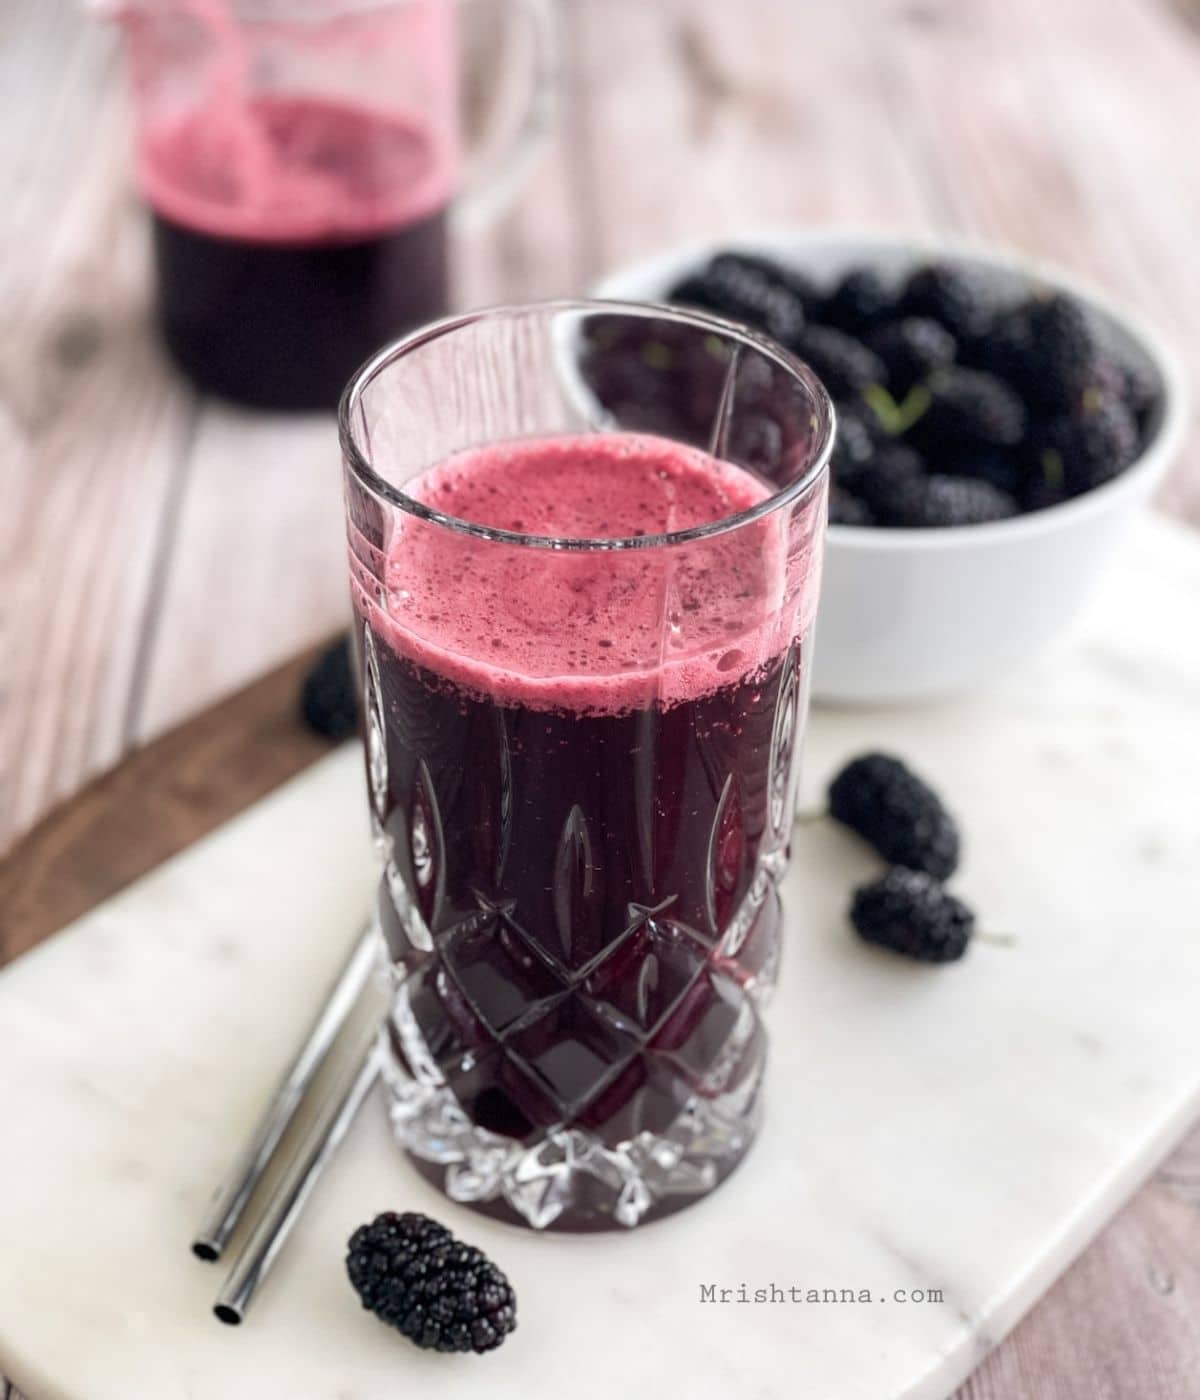 A tall glass of mulberry juice is on the white tray.